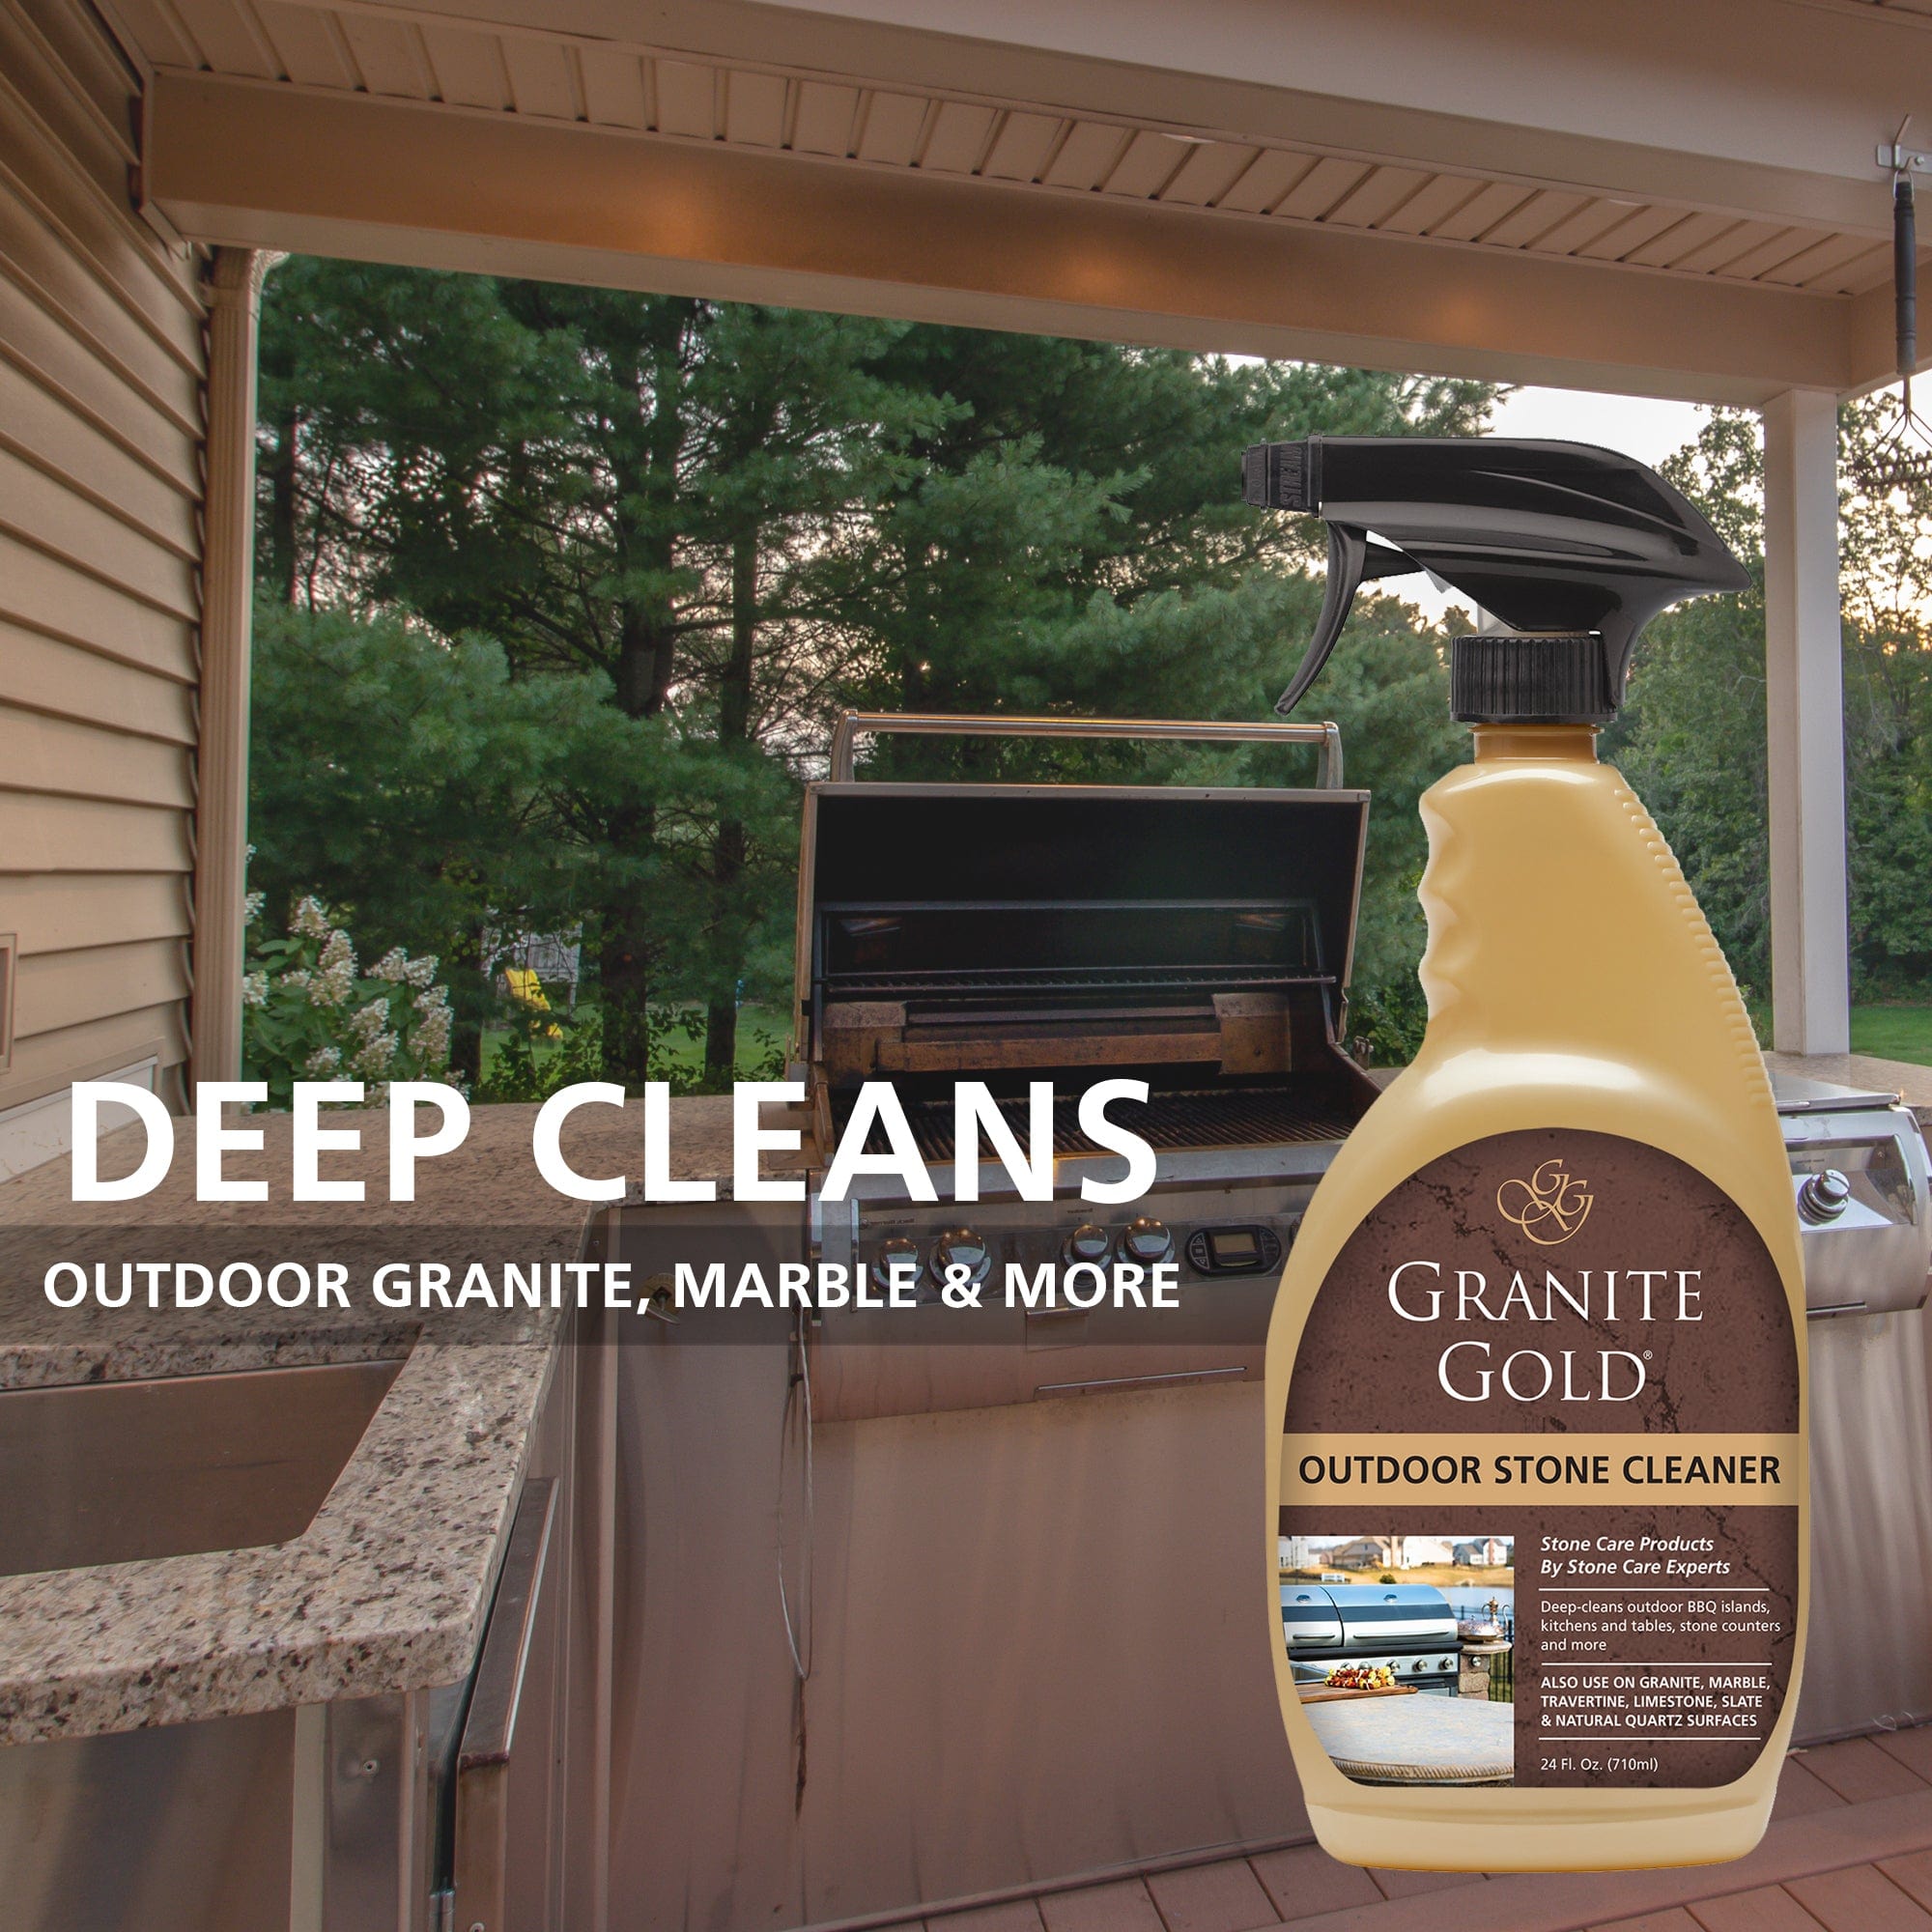 Golden Care Multi-Surface Outdoor Furniture Cleaner